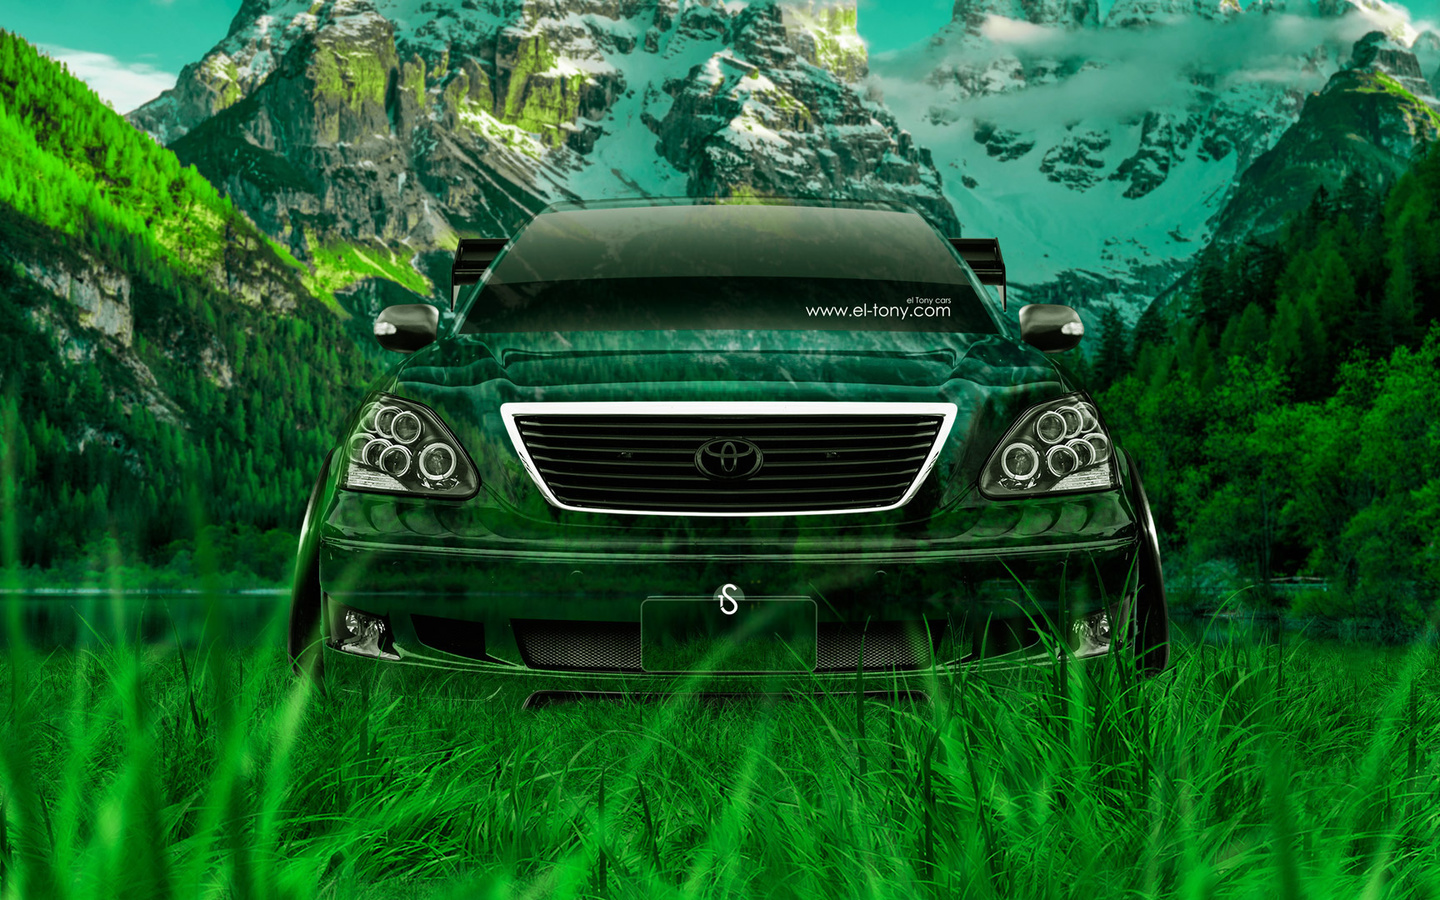 tony kokhan, toyota, celsior, jdm, tuning, front, crystal, nature, car, green, grass, hd wallpapers, el tony cars, photoshop, design, art, style,  , , , ,  , , , , , , , , 